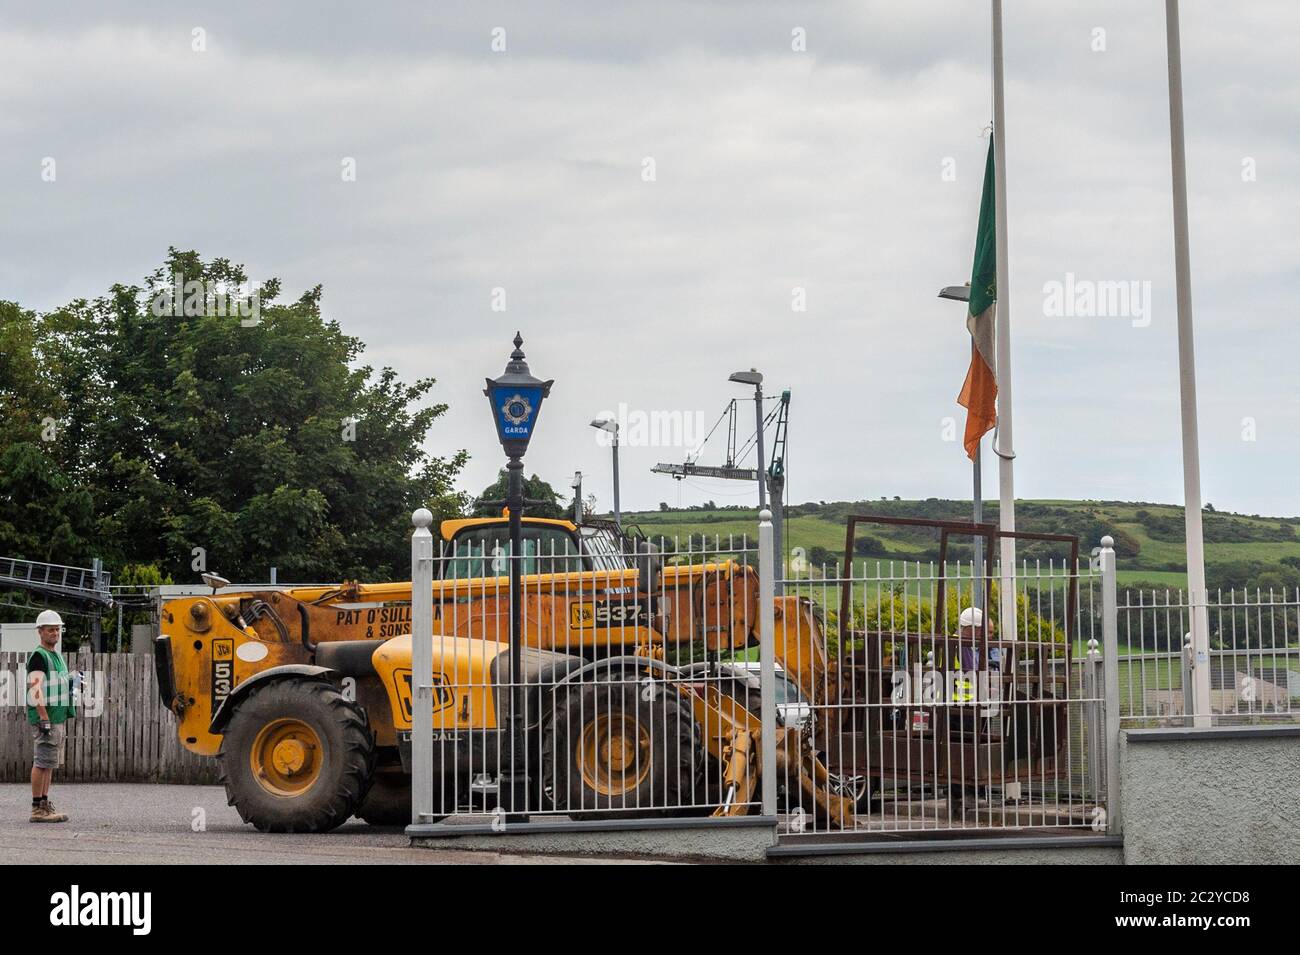 Clonakilty, West Cork, Ireland. 18th June, 2020. The Irish tricolour at Clonakilty Garda Station was flown at half mast today as a mark of respect to Detective Garda Colm Horkan who was murdered in Castlerea, Co. Roscommon last night. Garda Horkan was shot by his own weapon by a man in his 40's, who is now in custody. Workmen spent time this afternoon repairing the flagpole. Credit: AG News/Alamy Live News Stock Photo